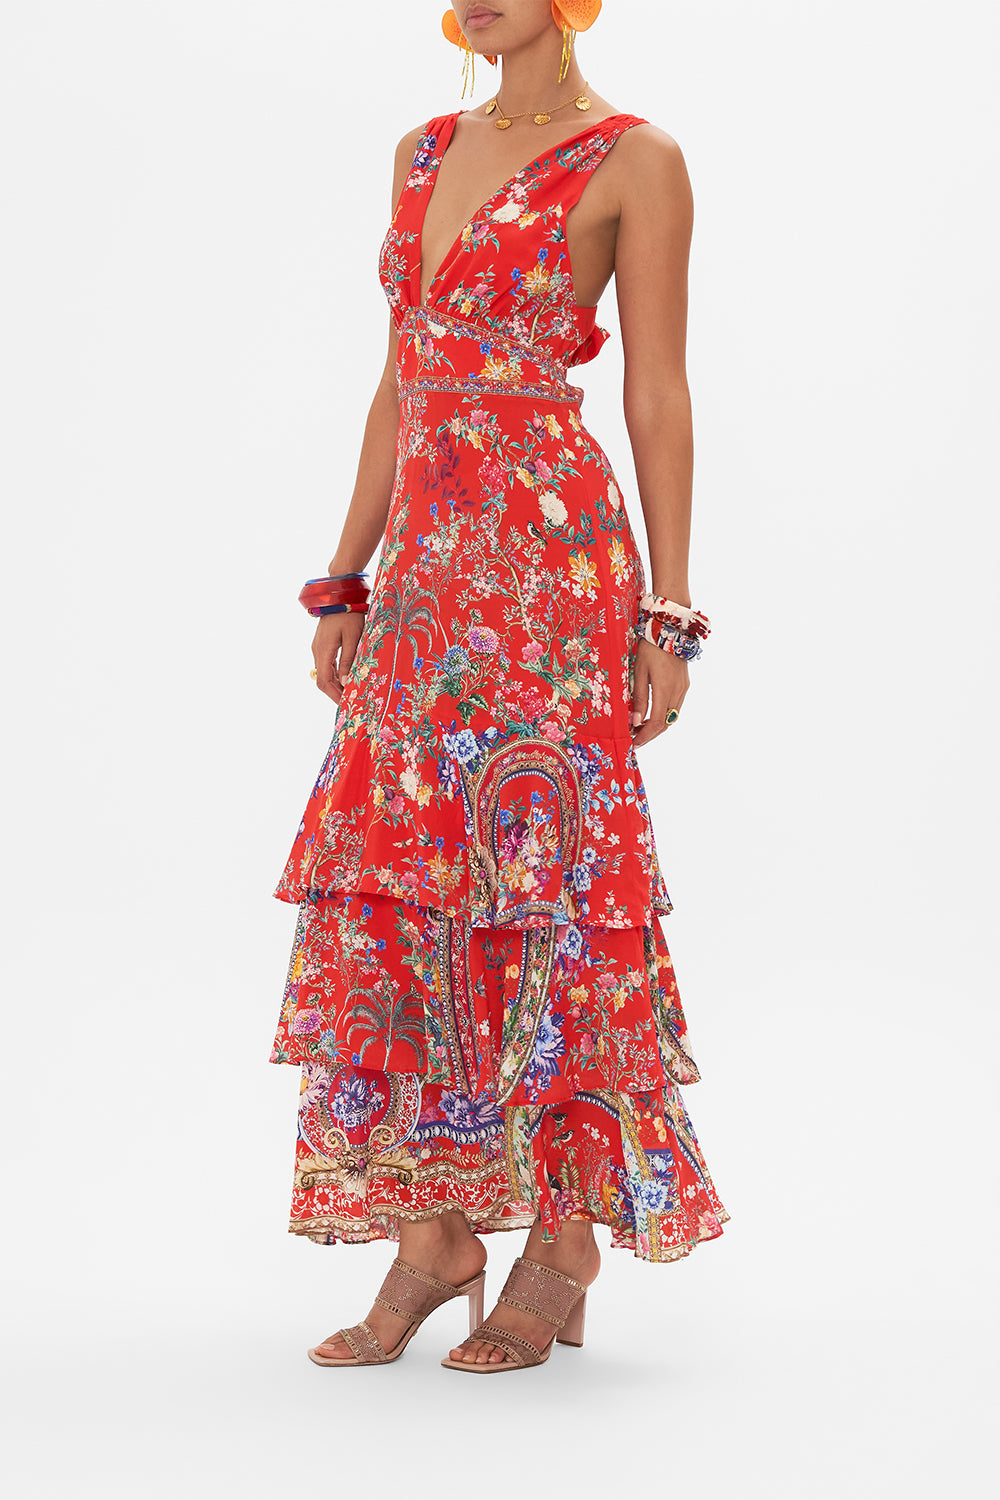 CAMILLA floral print ruffle dress in The Summer Palace print